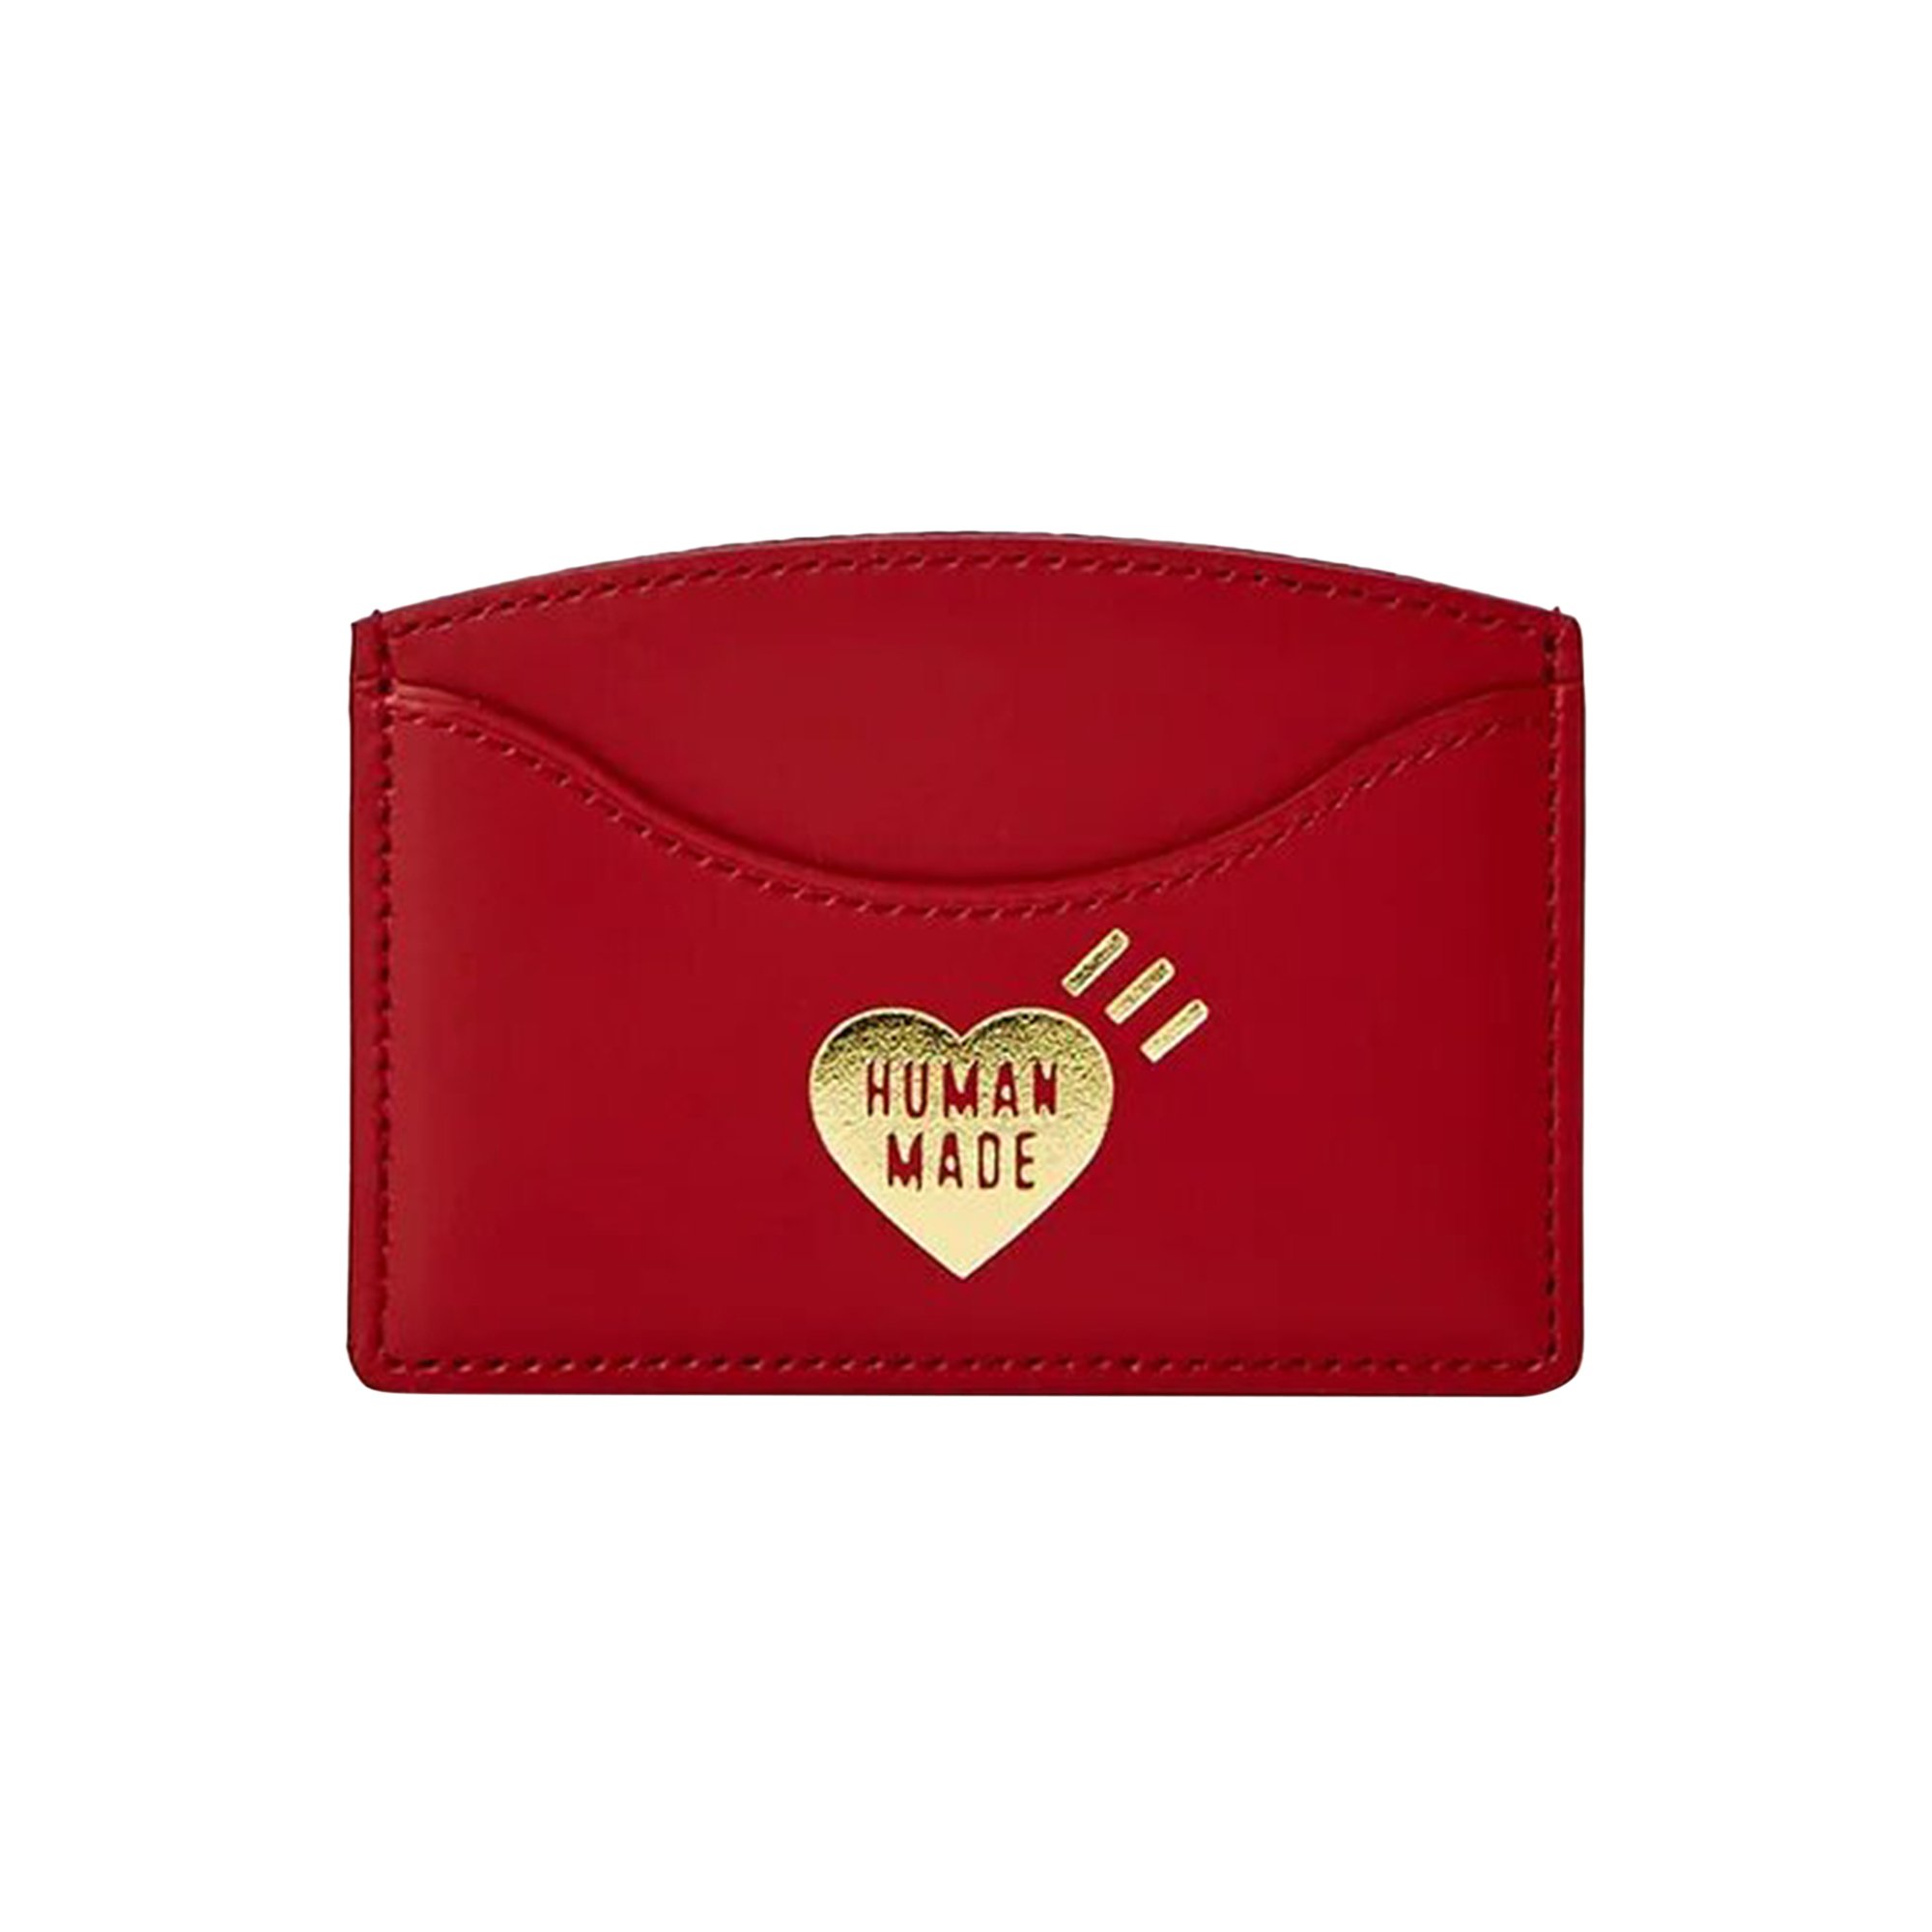 Buy Human Made Leather Card Case 'Red' - HM25GD060 RED | GOAT UK